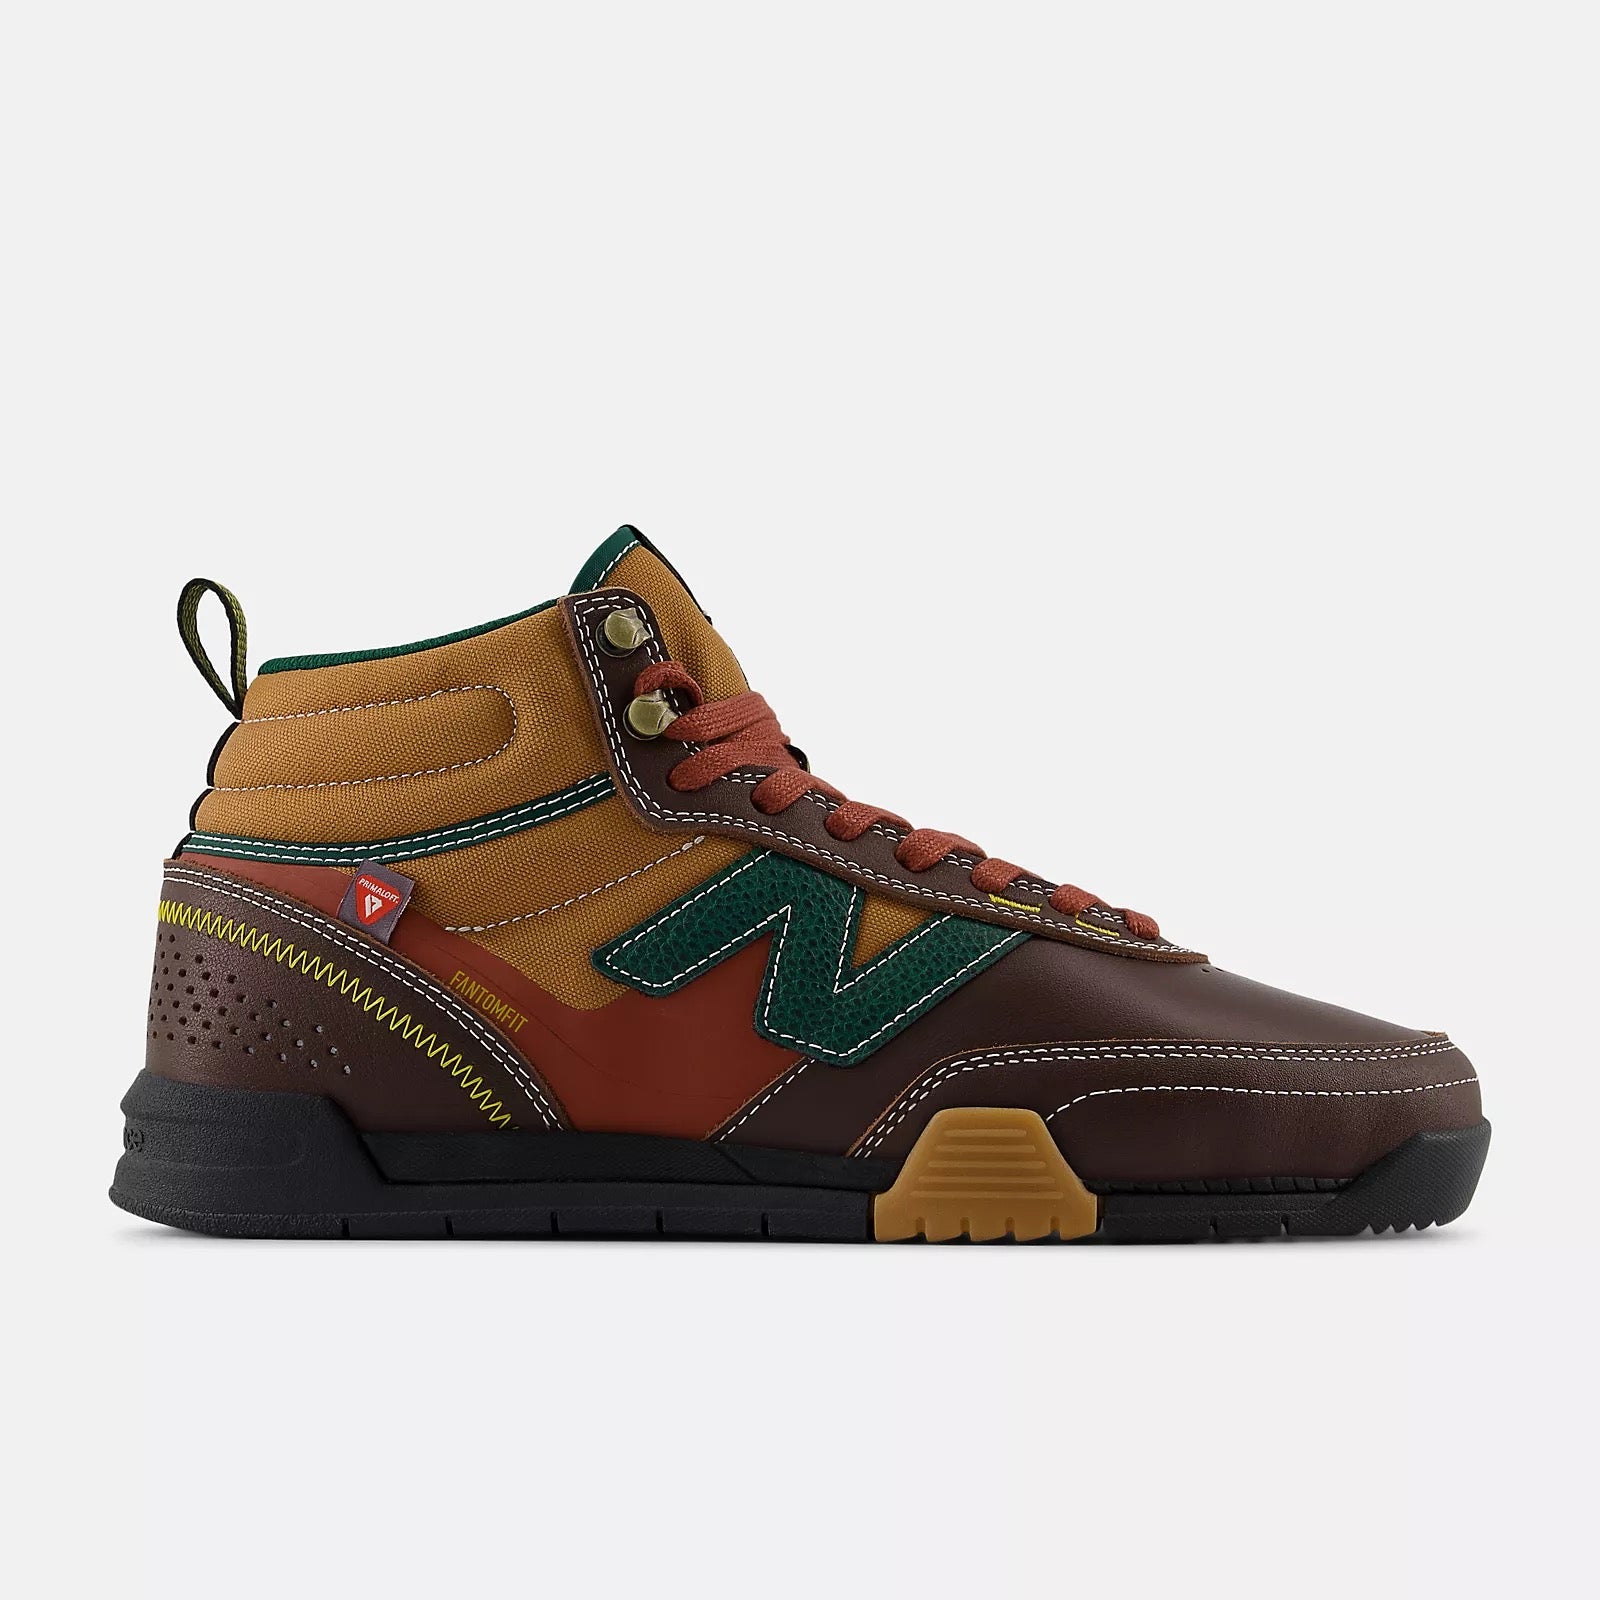 New Balance Numeric 440 v2 Trail High  Brown with forest green